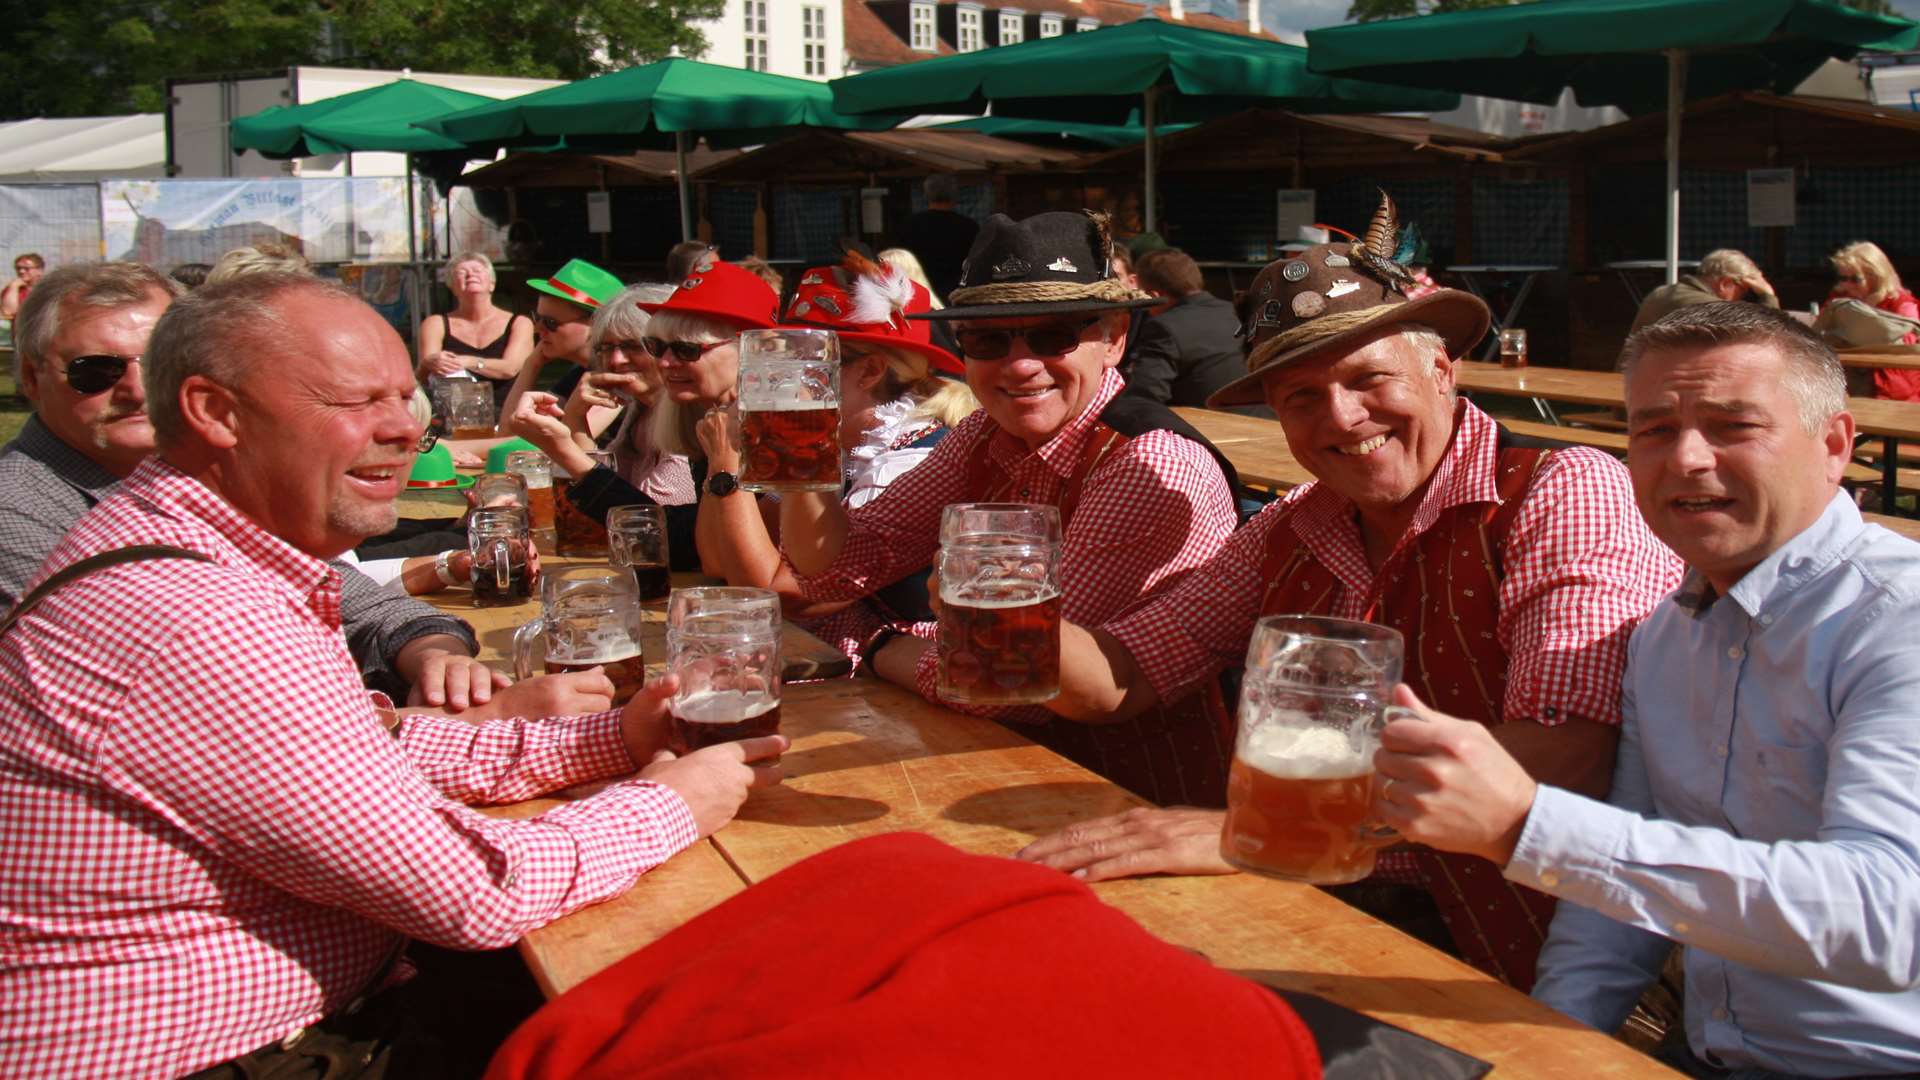 Guests enjoying a beer in a Bavarian style stein